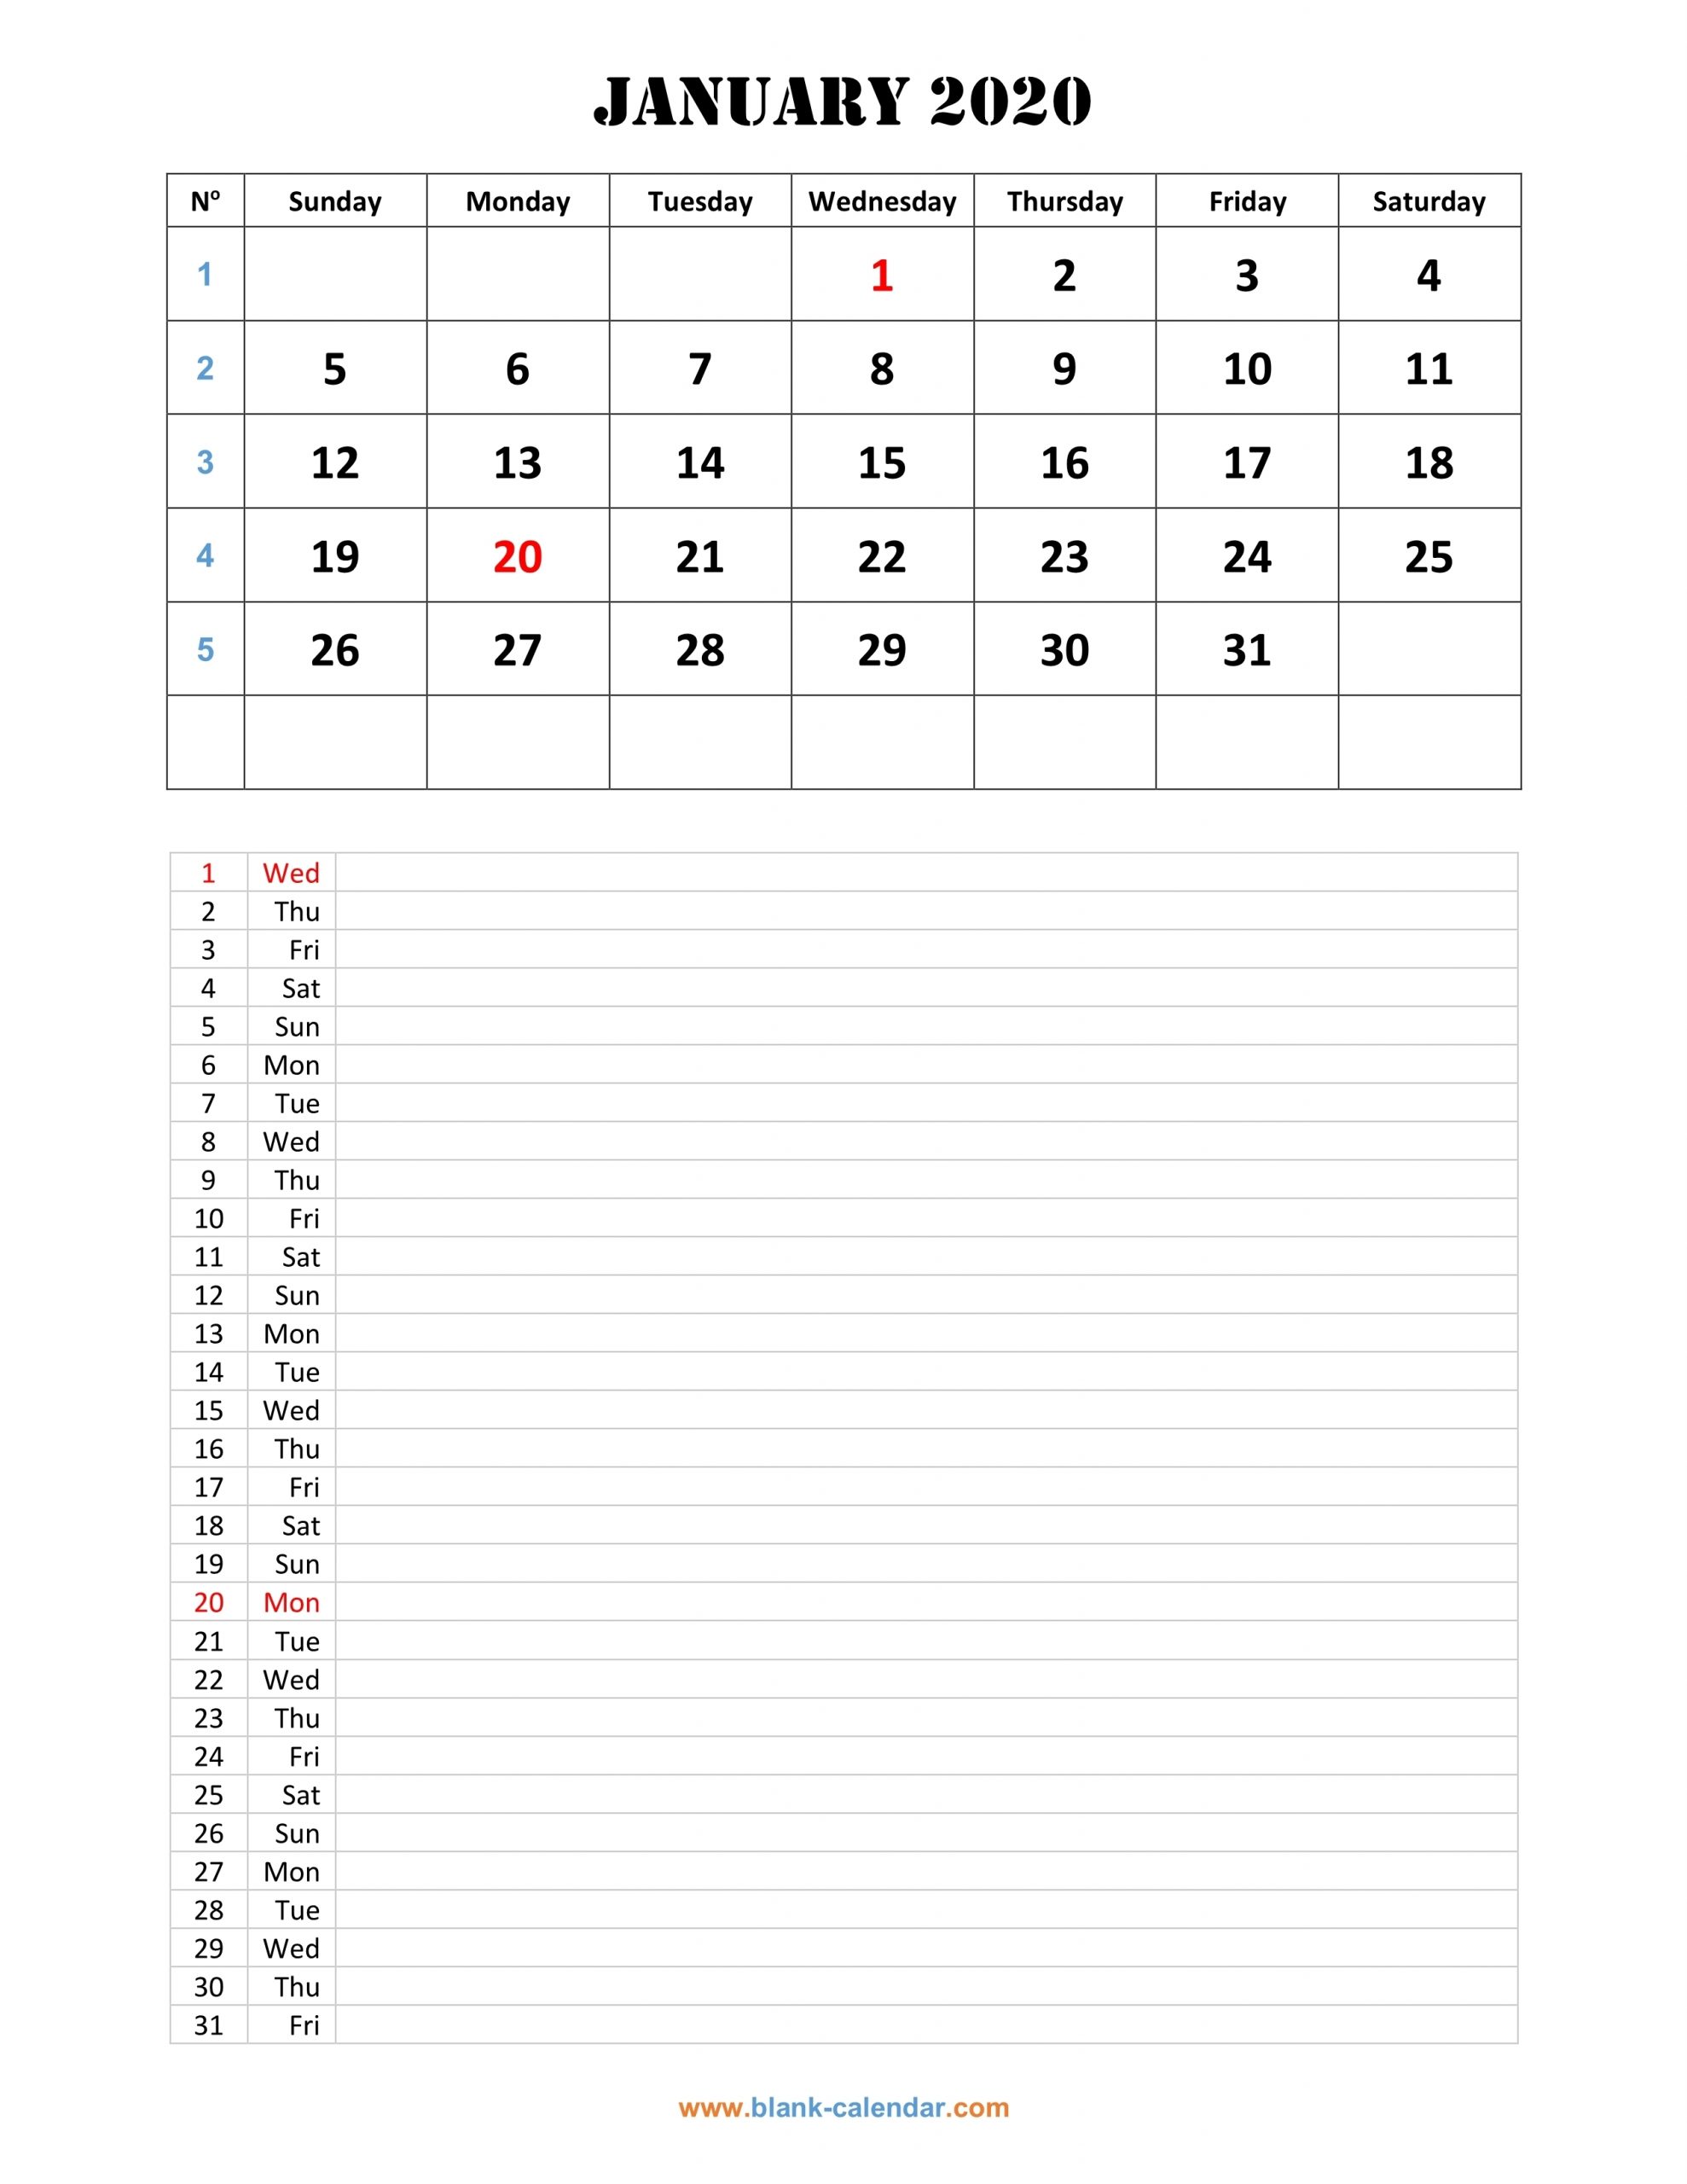 Monthly Calendar 2020 | Free Download, Editable And Printable with regard to Calendar 2020 Week Wise In Window